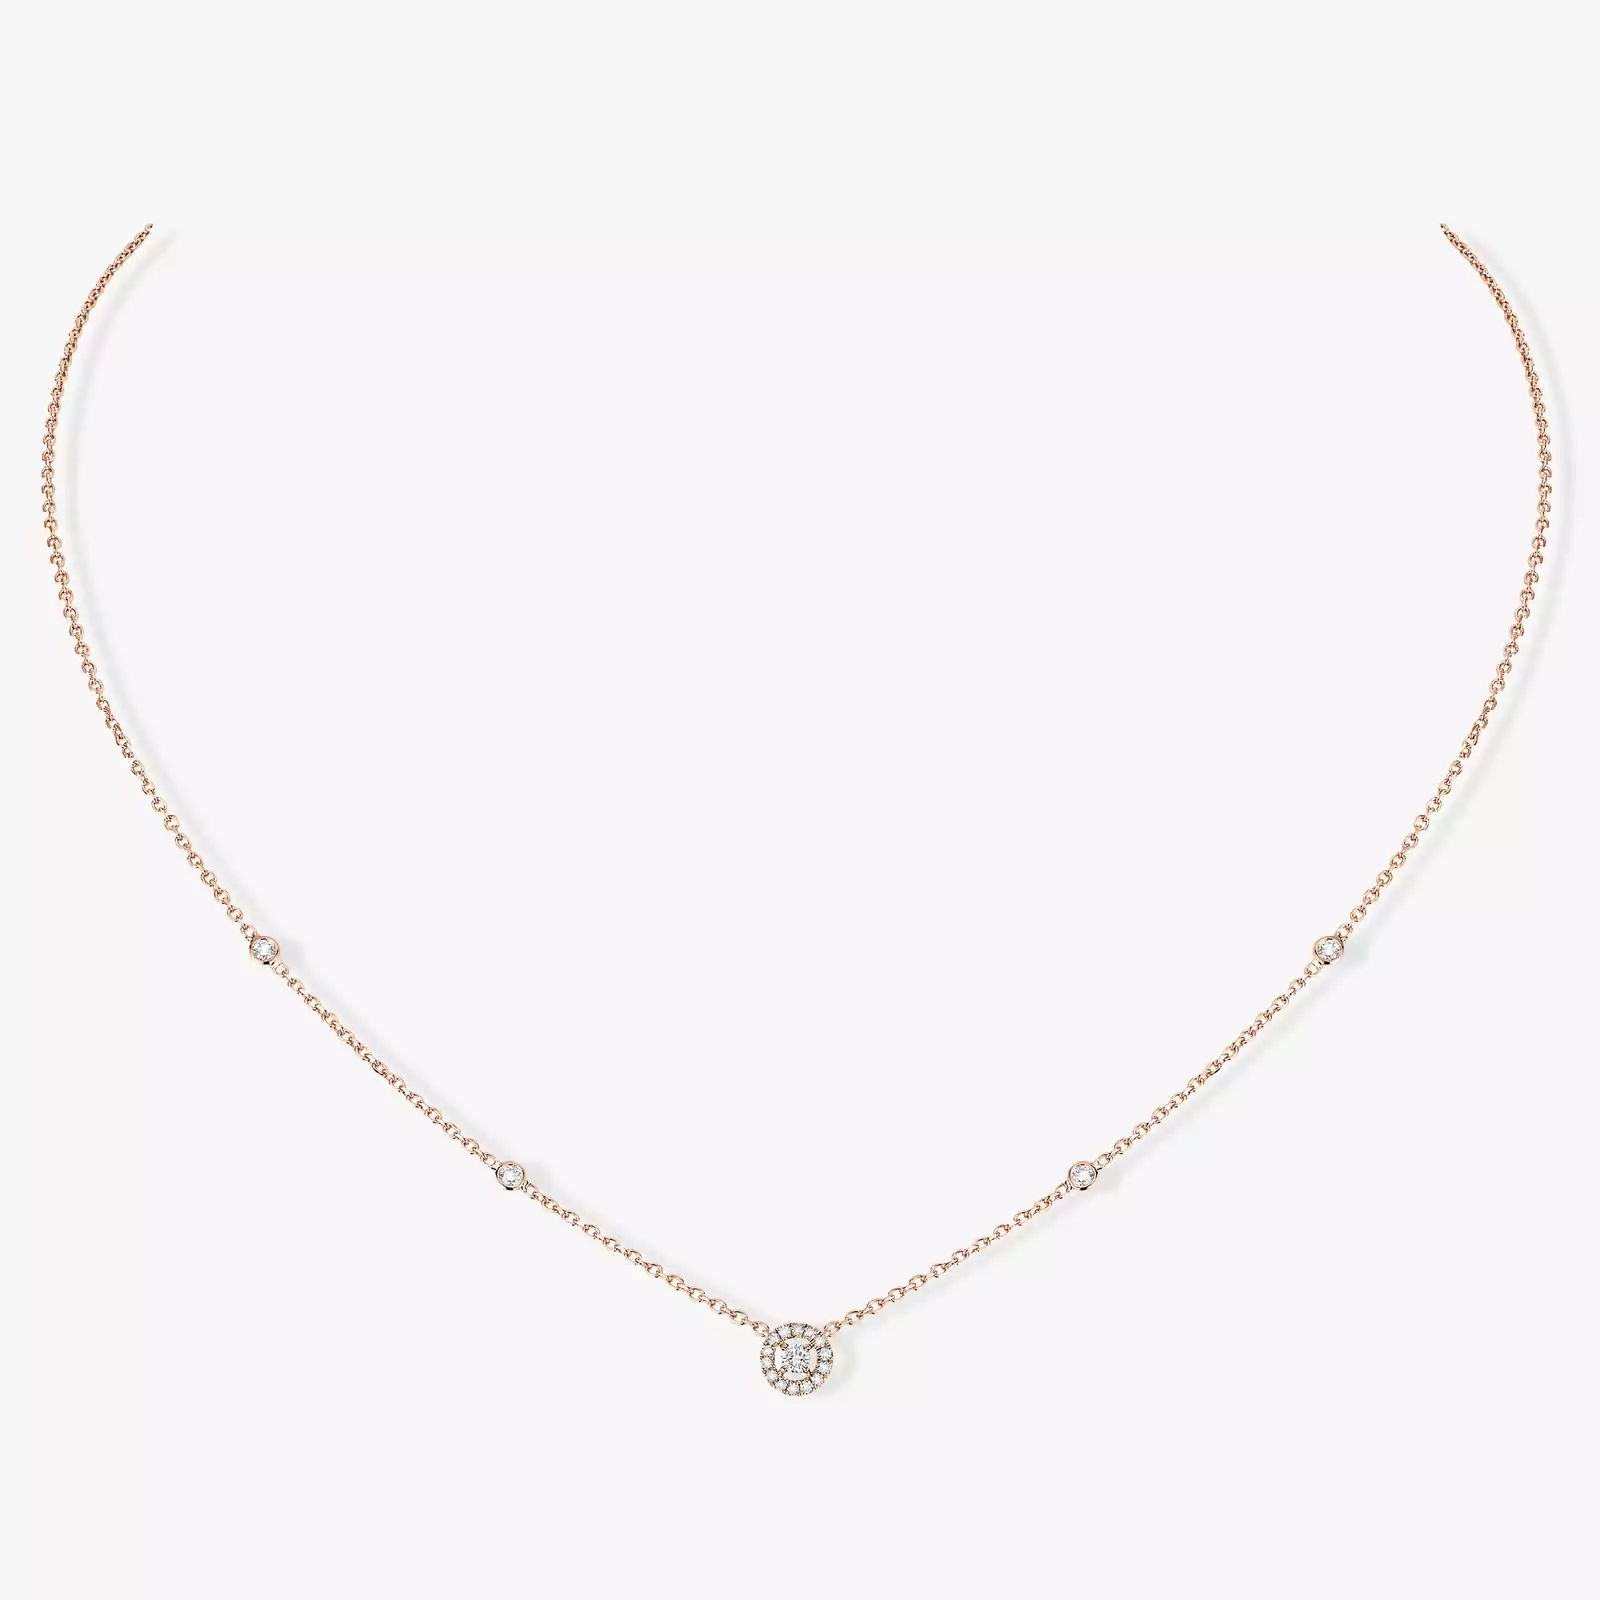 Joy XS Pink Gold For Her Diamond Necklace 05370-PG